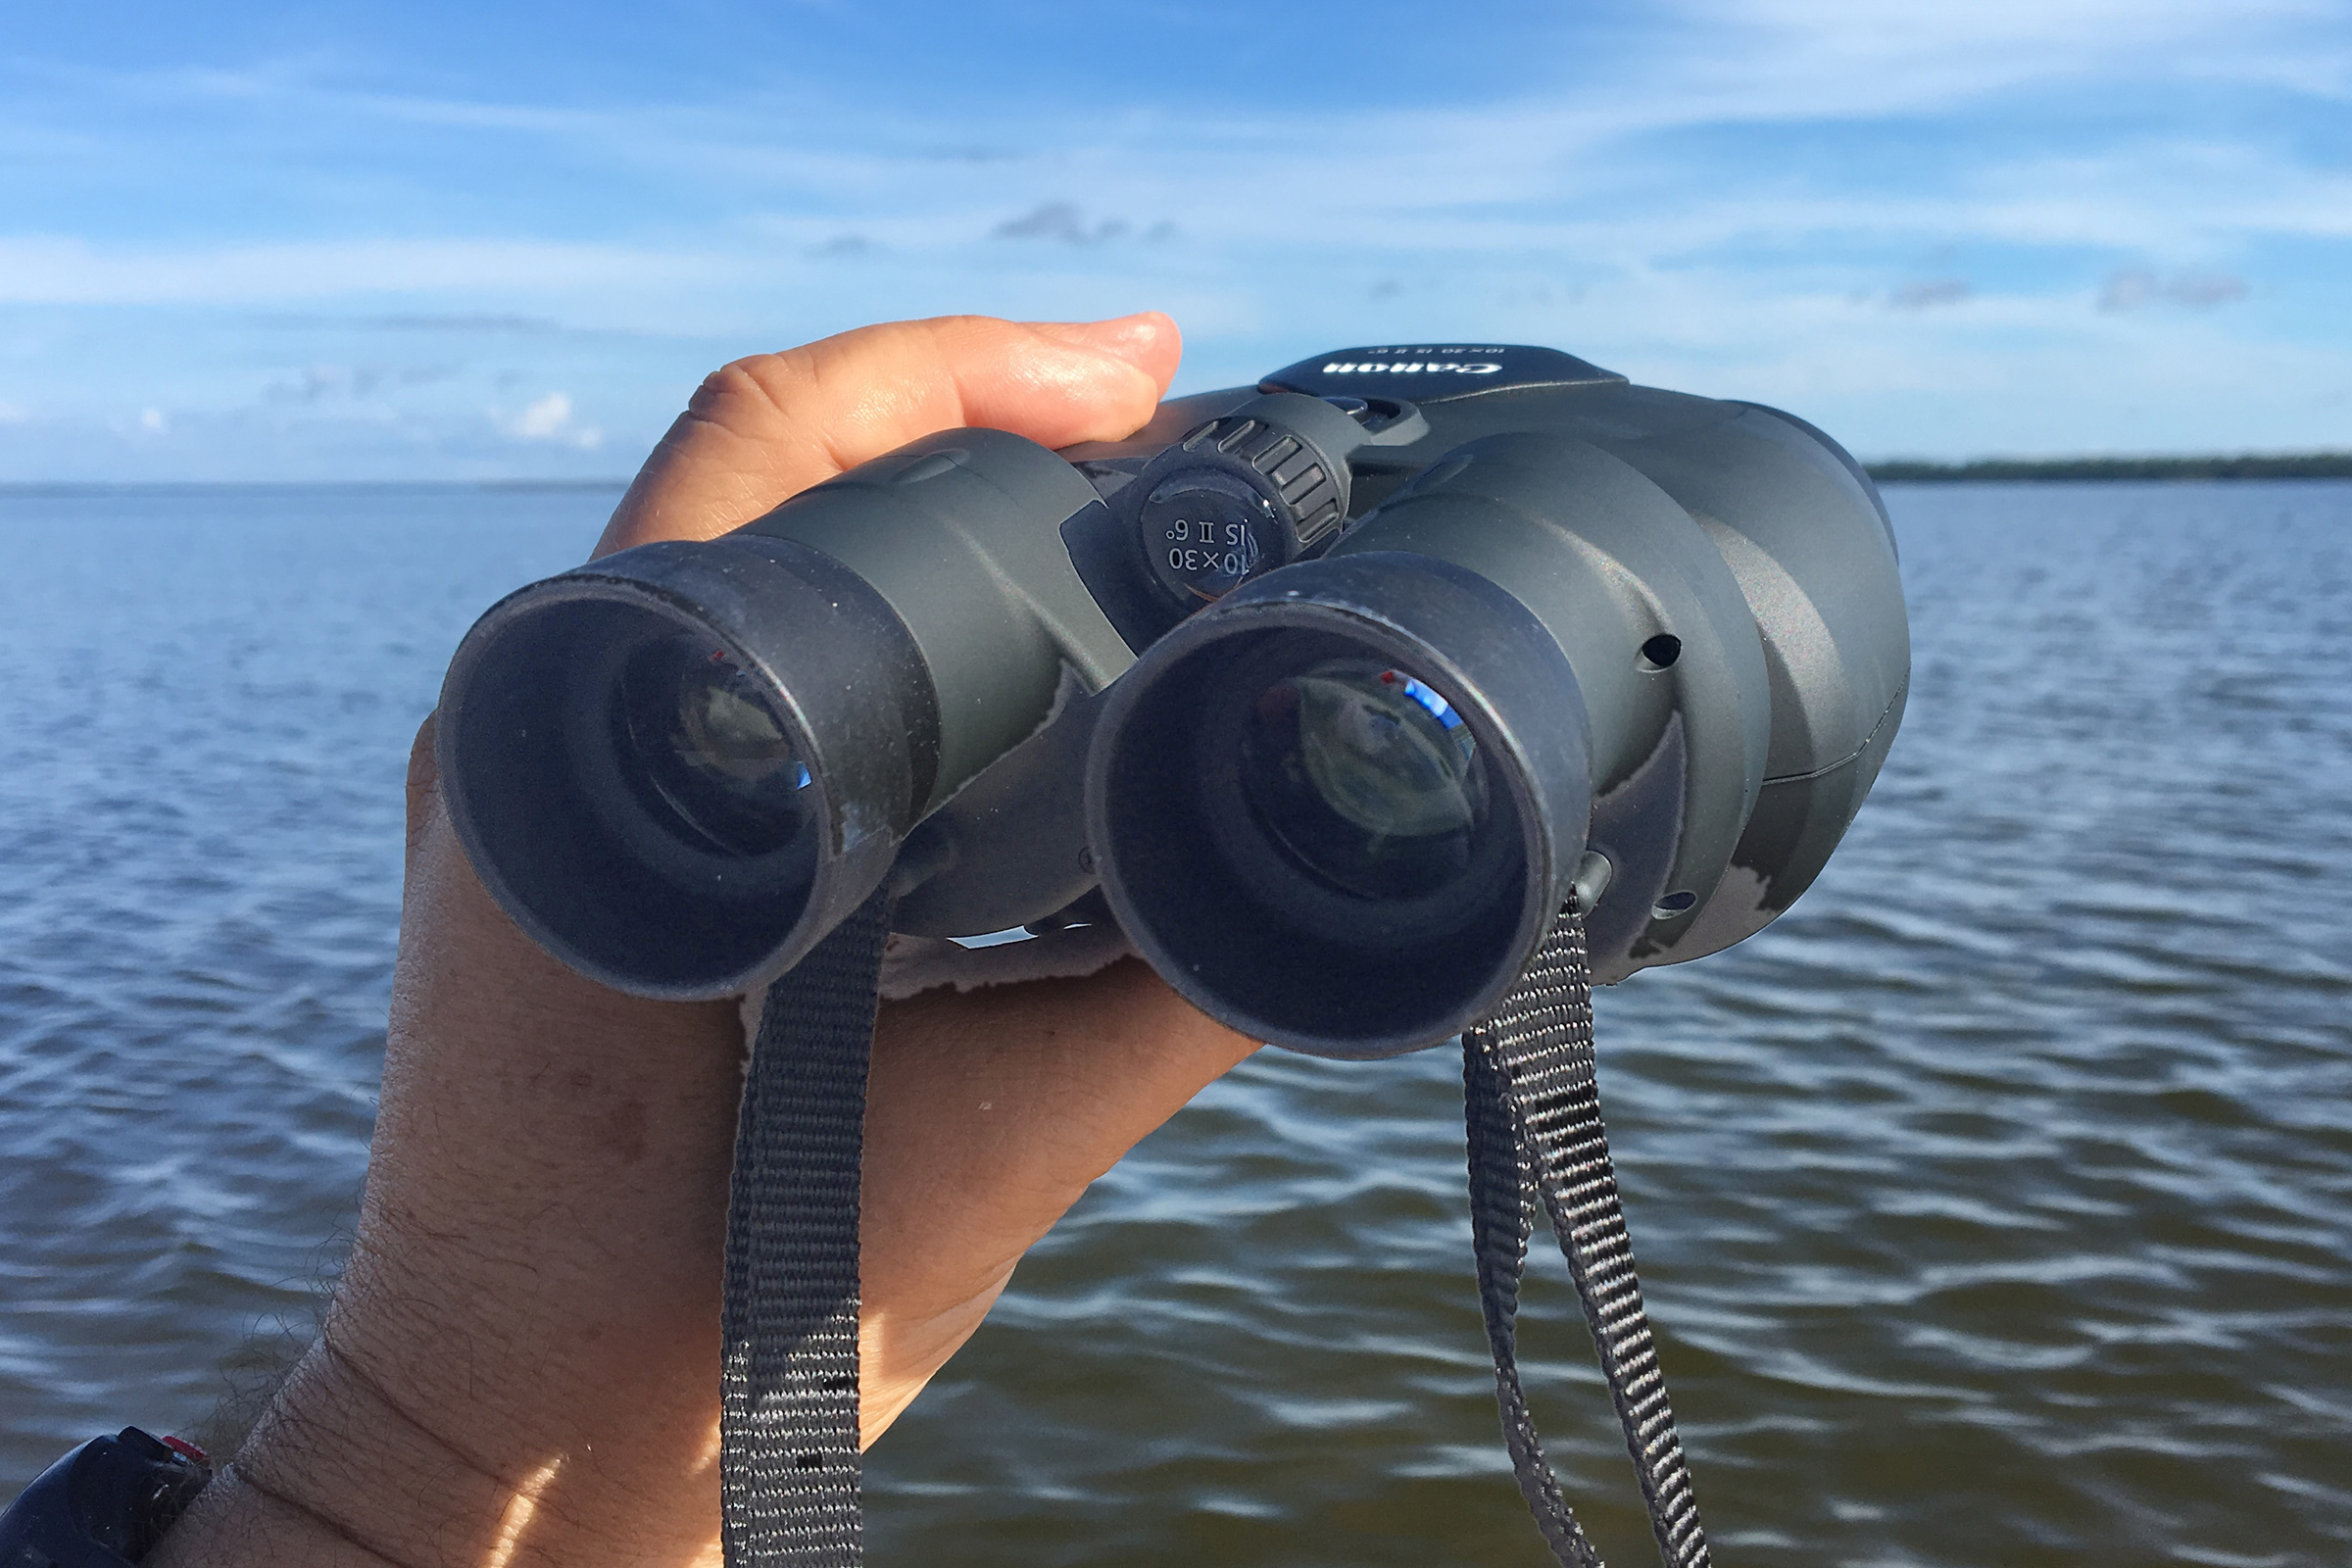 Replacement lens caps for Canon 10x30 Stabilization Binoculars by jbergmans  - Thingiverse